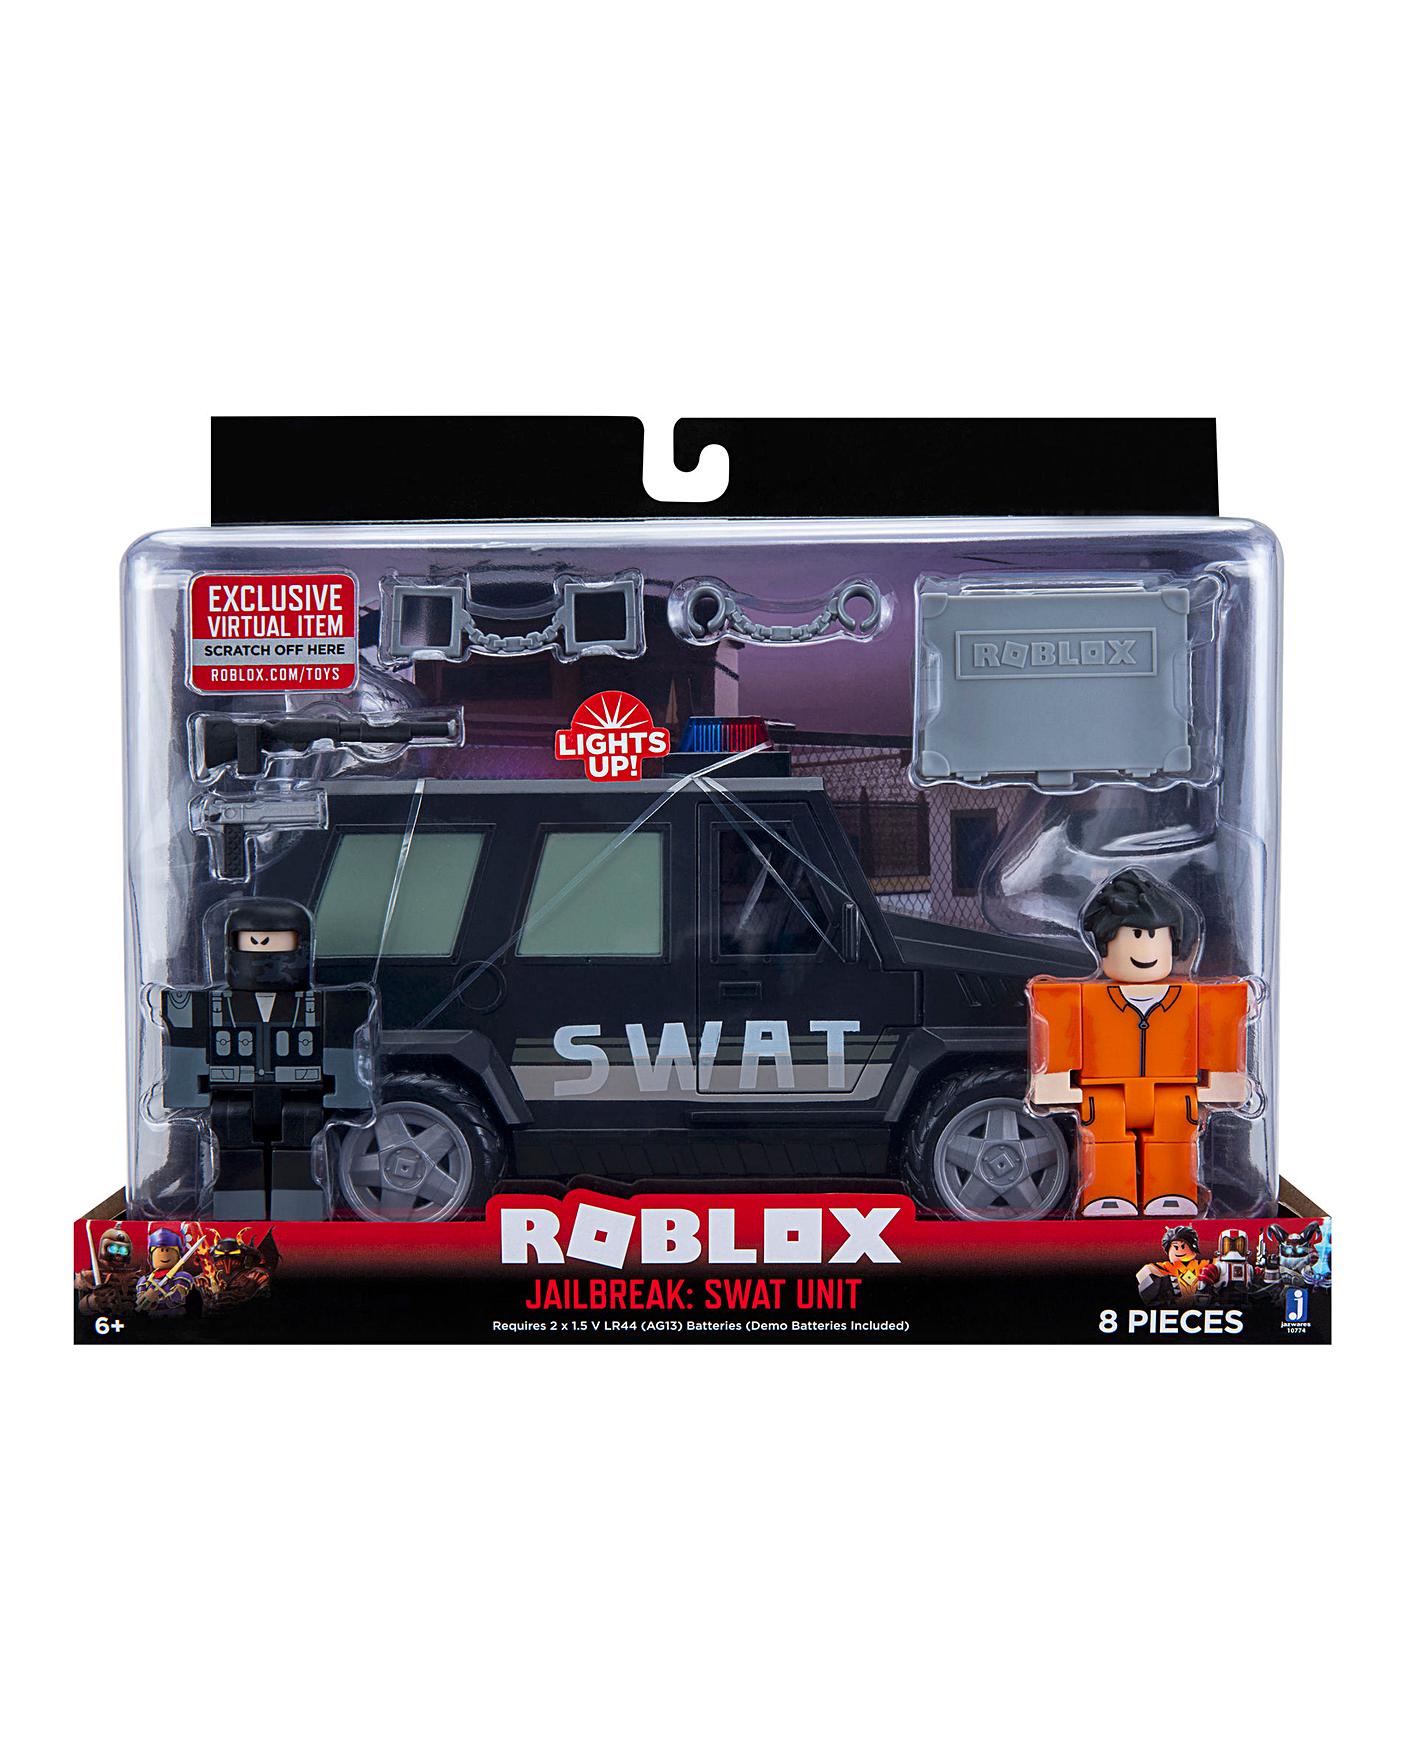 Roblox Swat Van Oxendales - ambulance i did not build this roblox